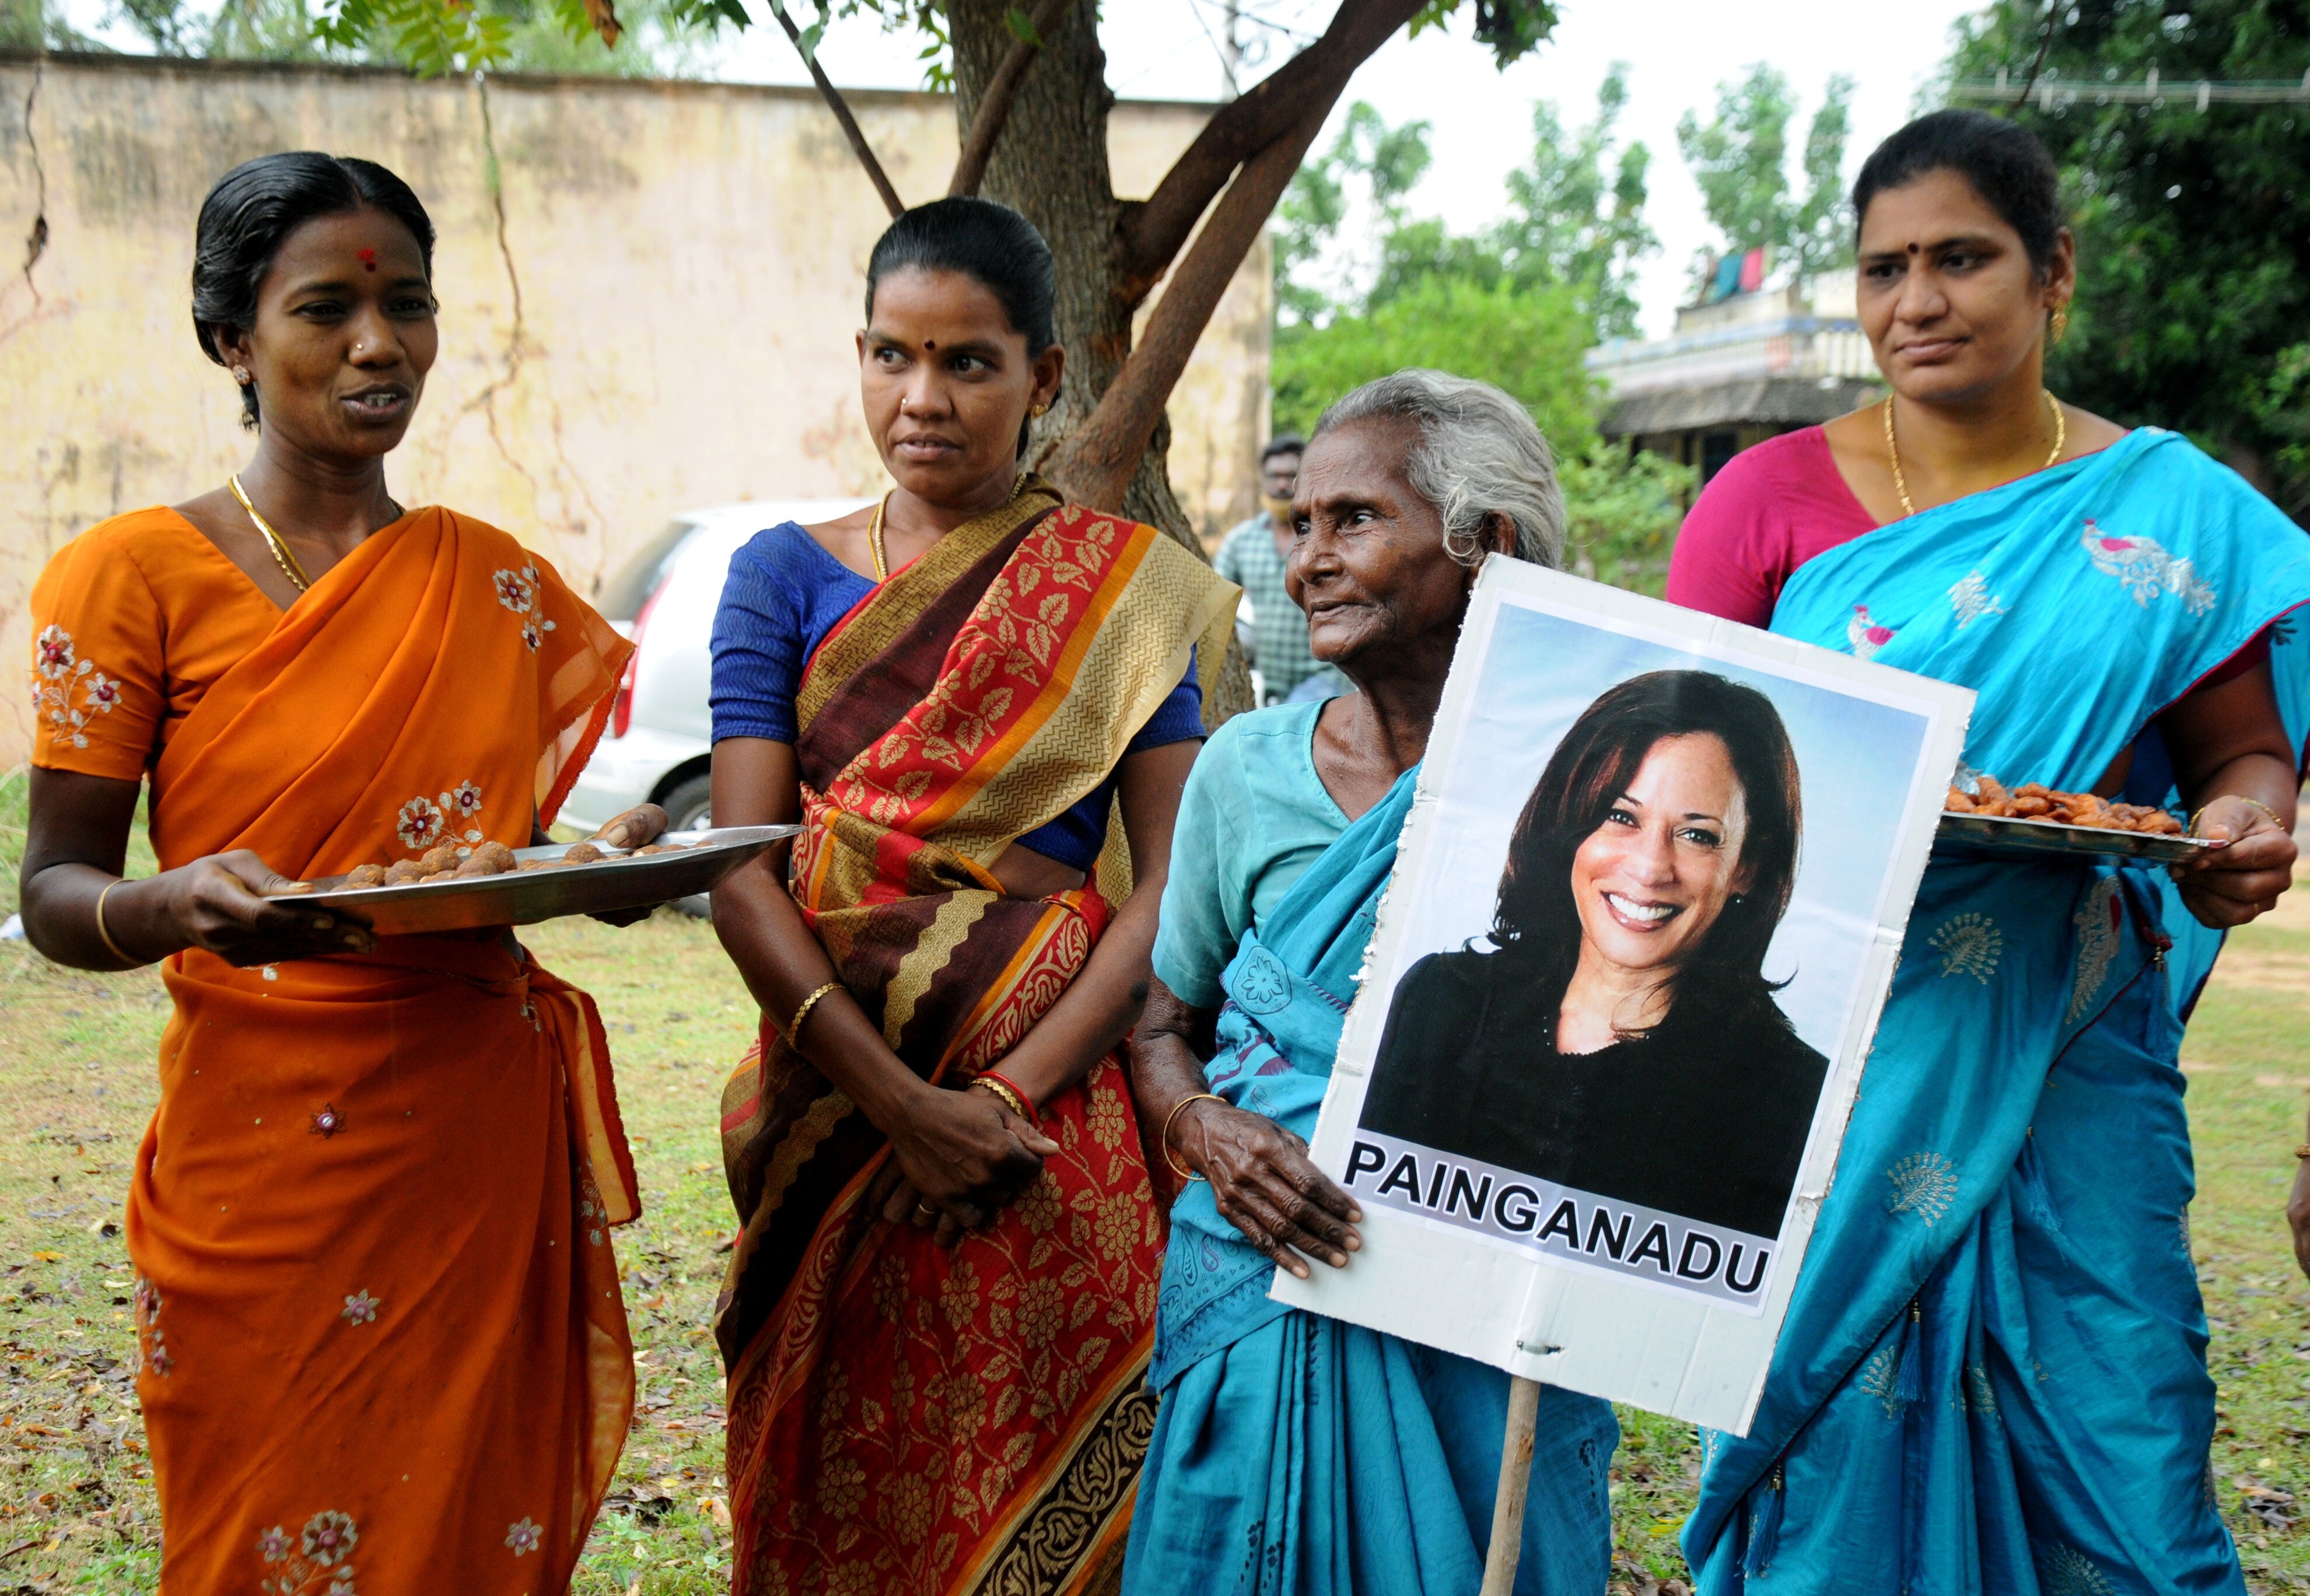 Indian women gather to celebrate the victory of US vice president-elect Kamala Harris. Despite India first electing a female prime minister in 1966, women find it difficult to advance in the world of politics. Photo: Reuters